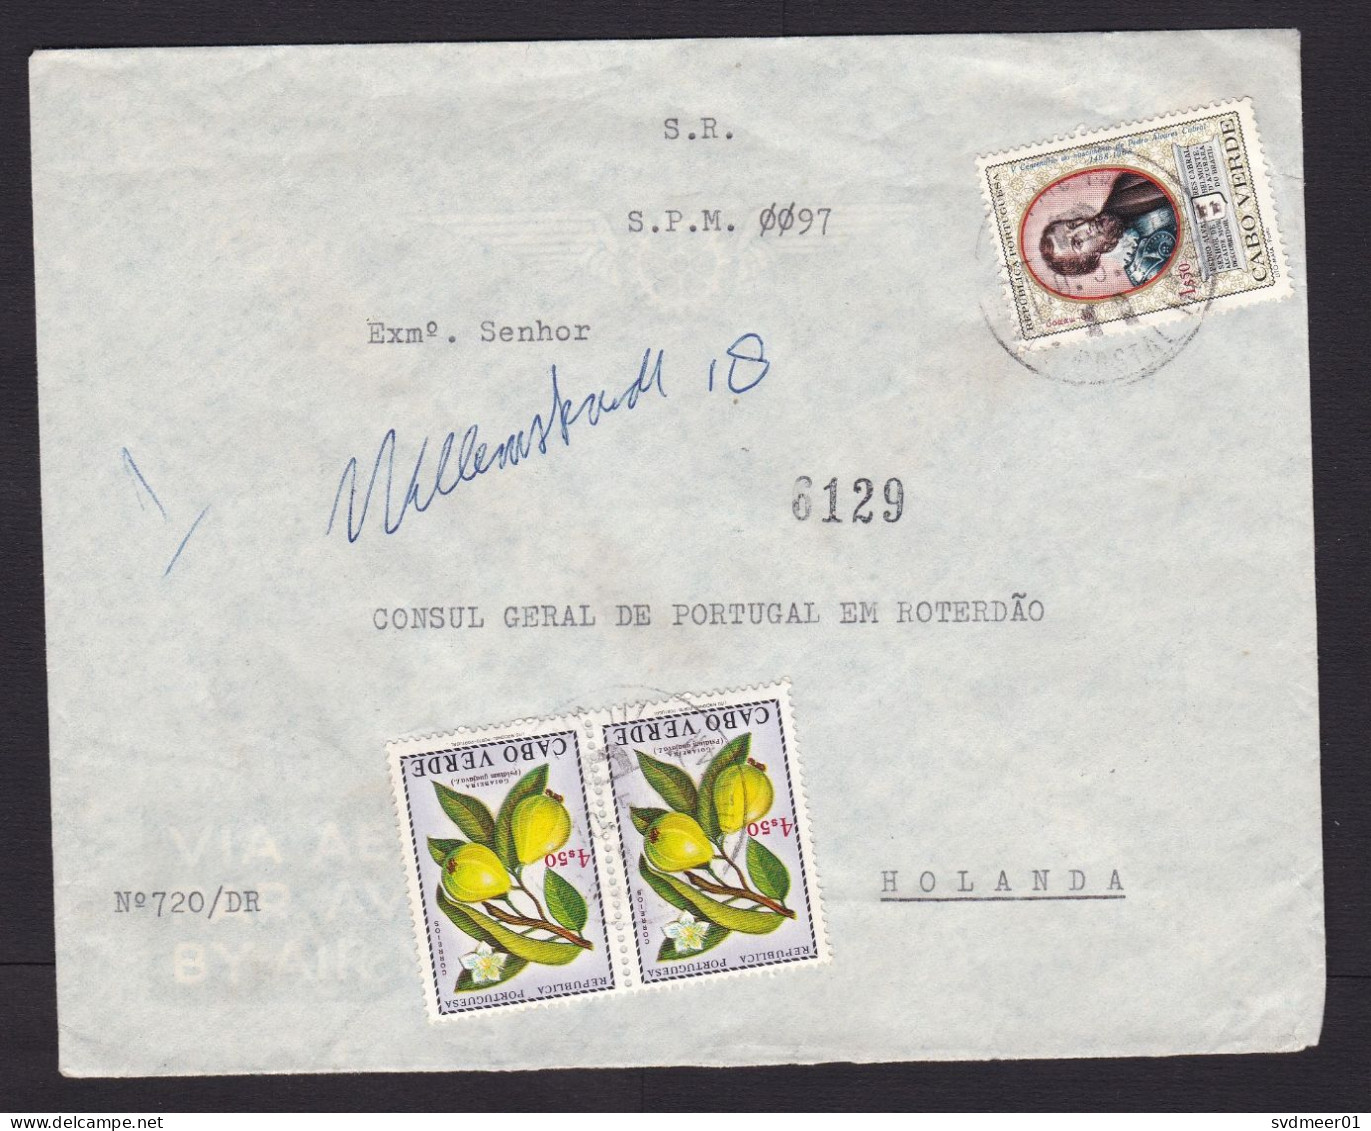 Cabo Verde: Cover To Netherlands, 1973, 3 Stamps, Fruit, History, To Consulate, No Address, Written Note (discolouring) - Islas De Cabo Verde